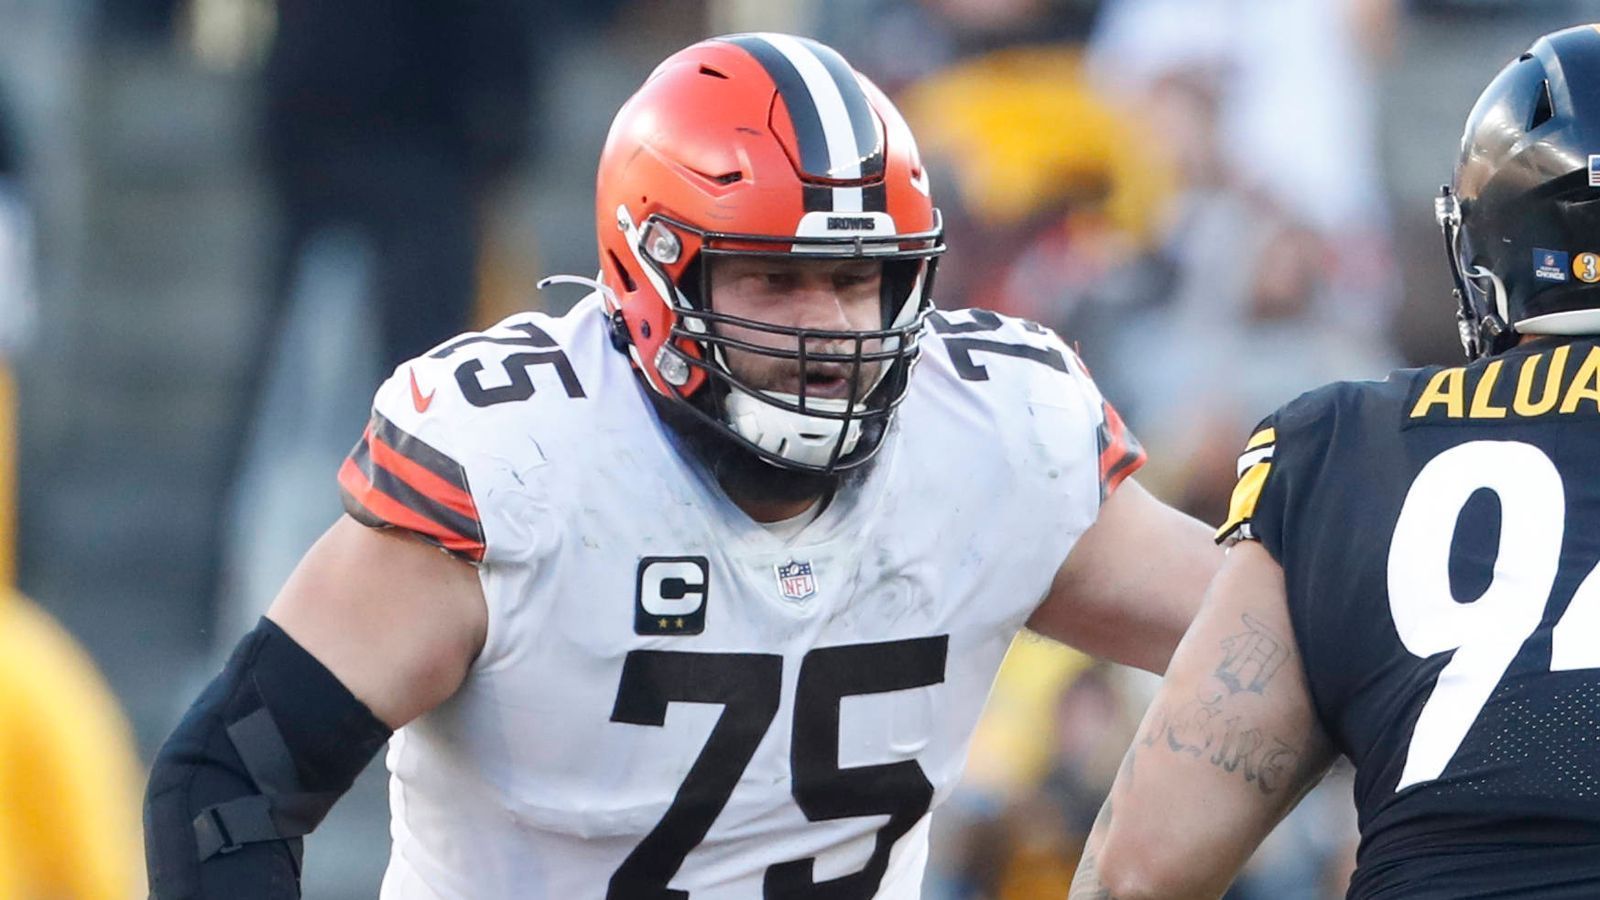 
                <strong>Joel Bitonio</strong><br>
                Position: Left GuardTeam: Cleveland Browns 
              